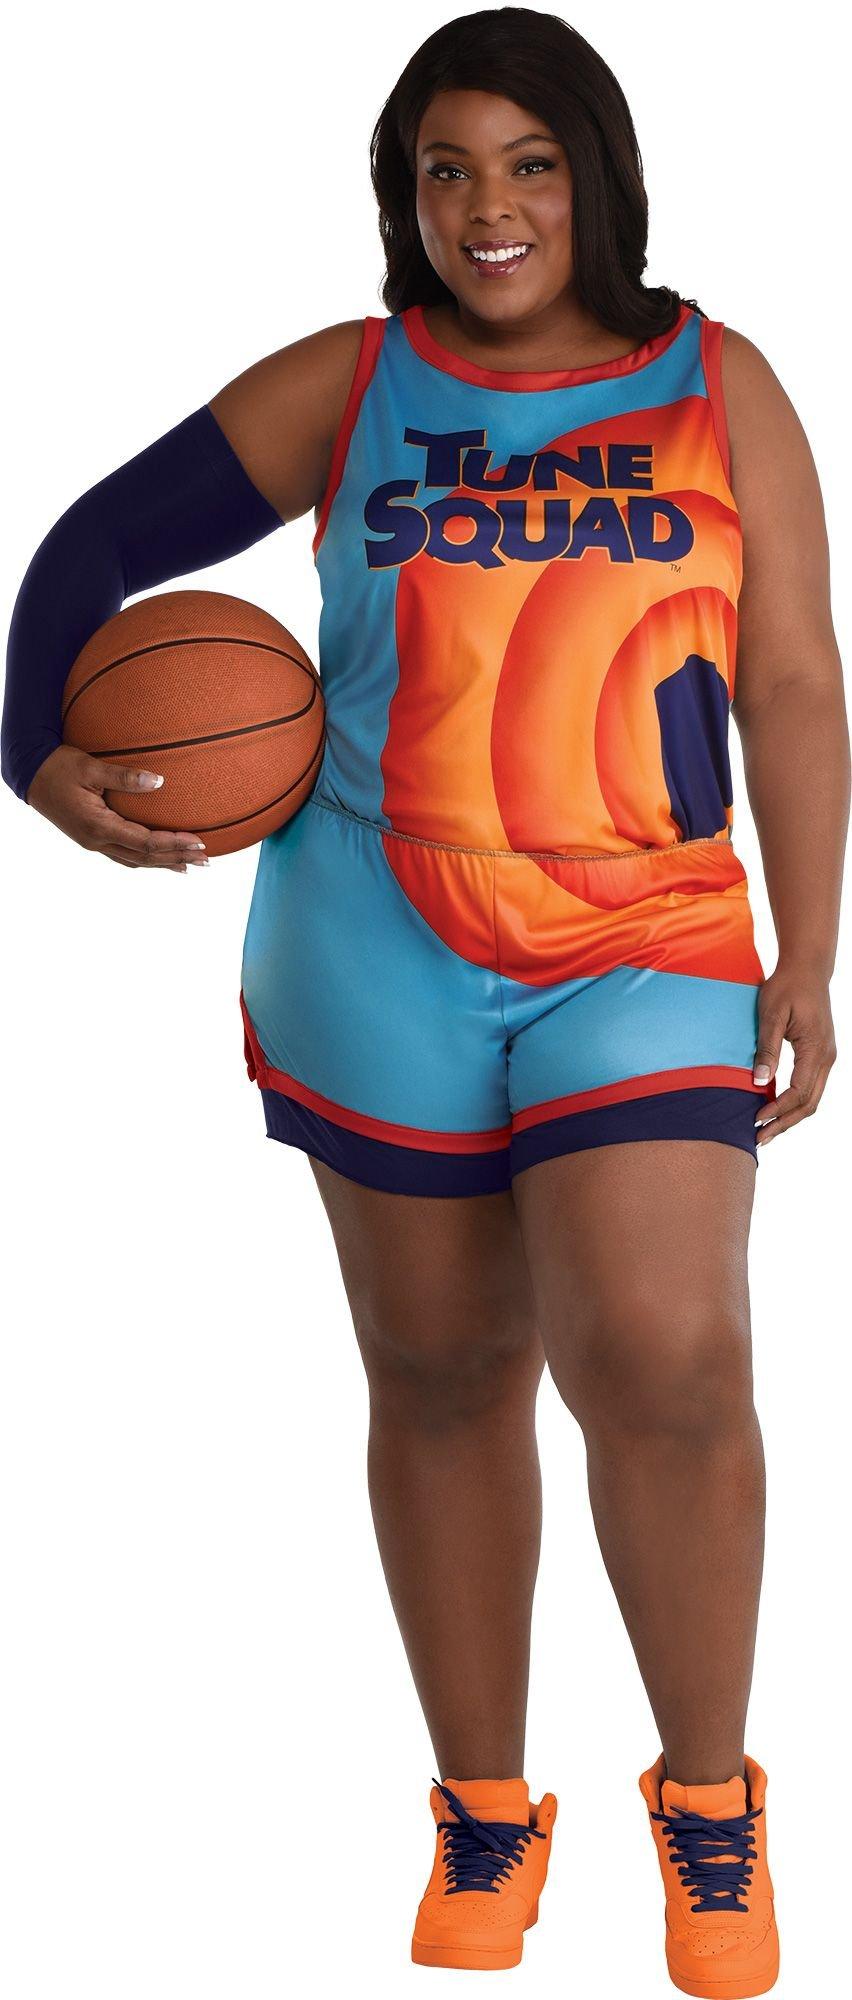 Space Jam Halloween Costumes for Adults & Kids